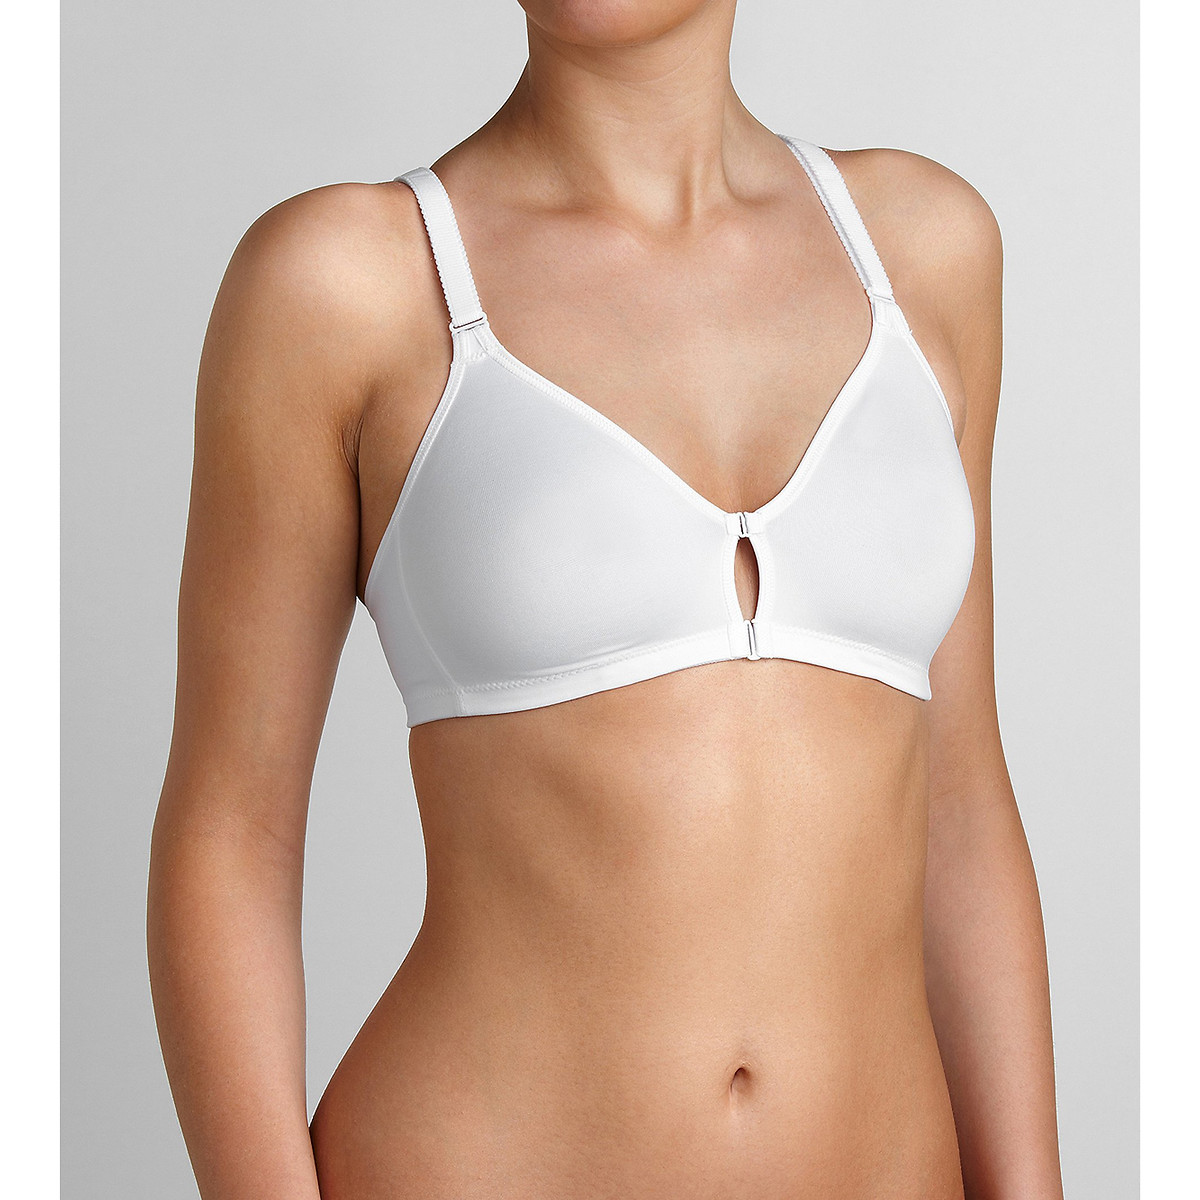 Image of Fitness Sports Bra without Underwiring